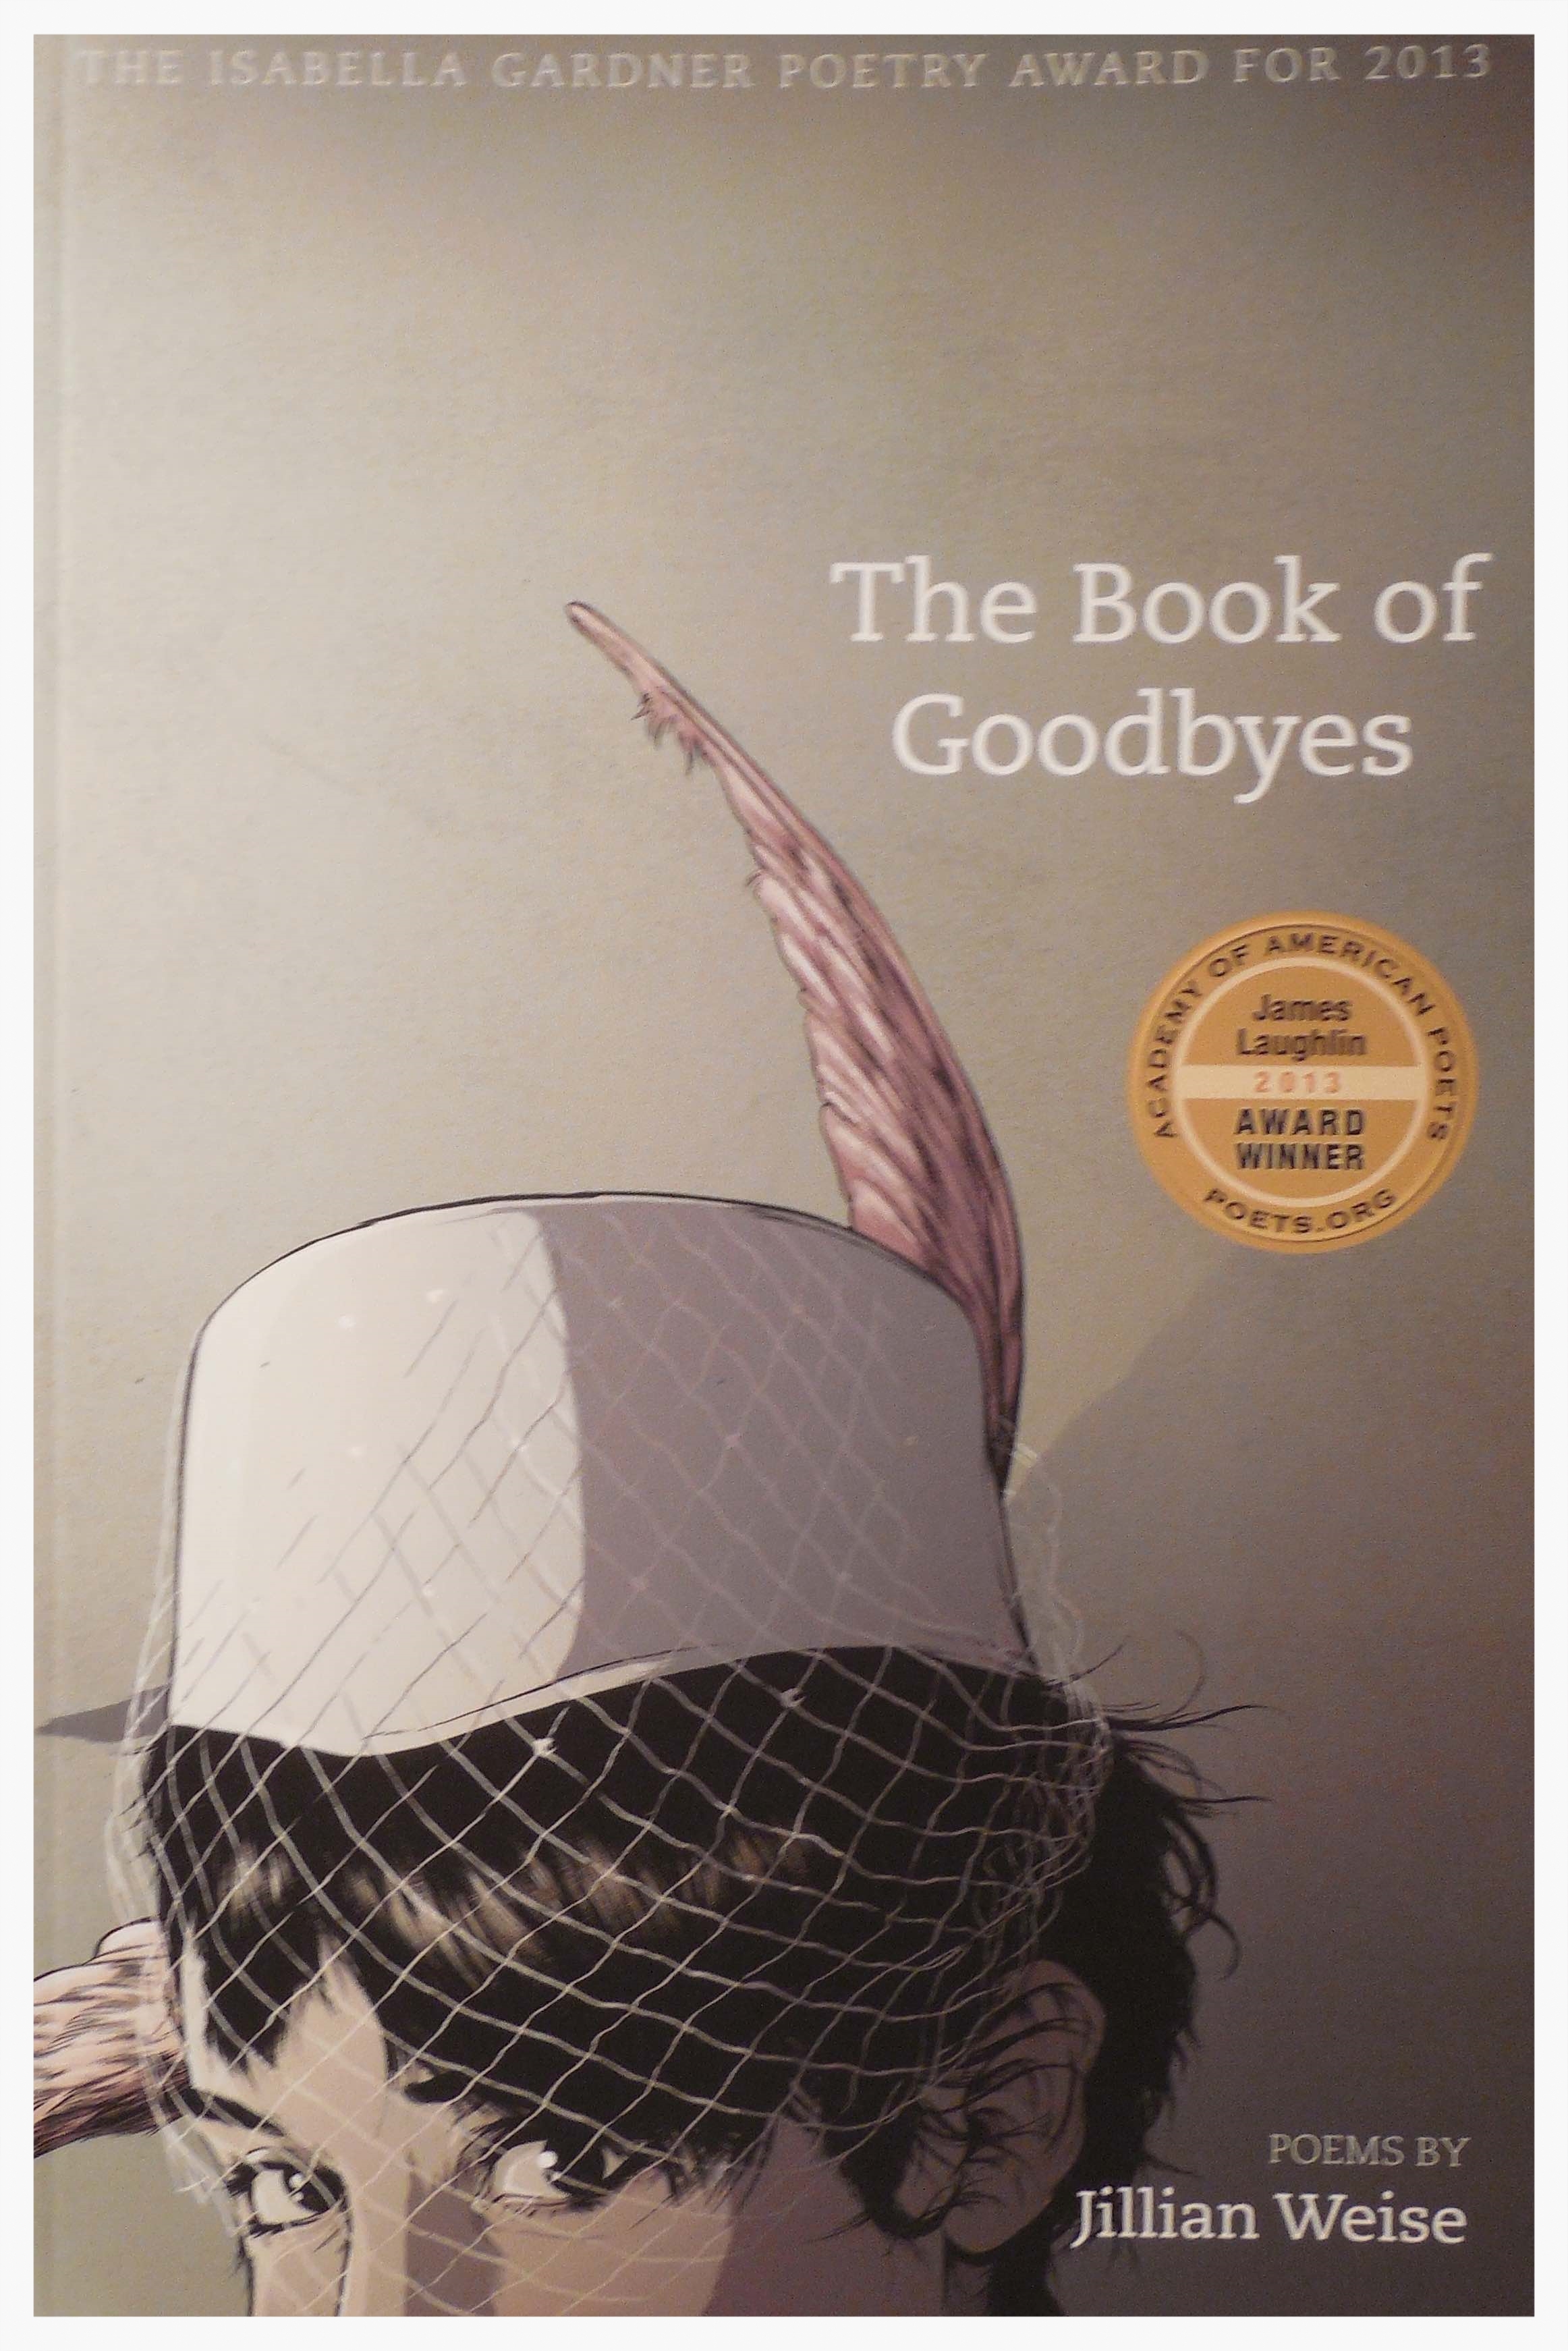 The Book of Goodbyes